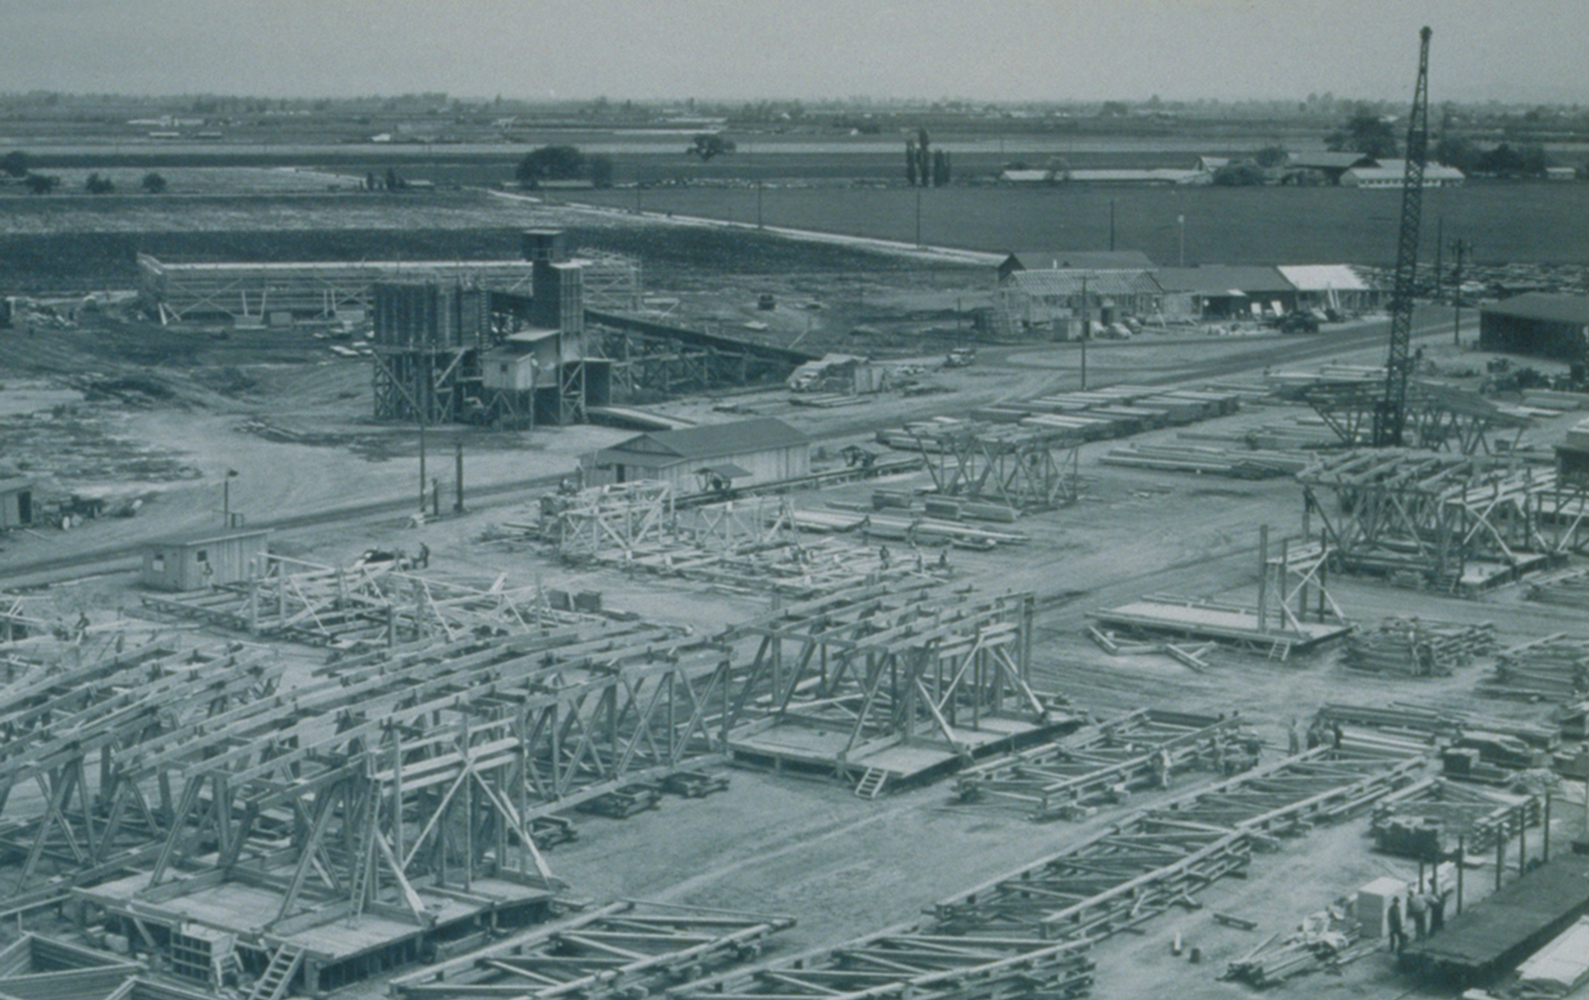 A birds-eye view of rows of dozens of large wood trusses being built onsite for the construction of 2 blimp hangars.